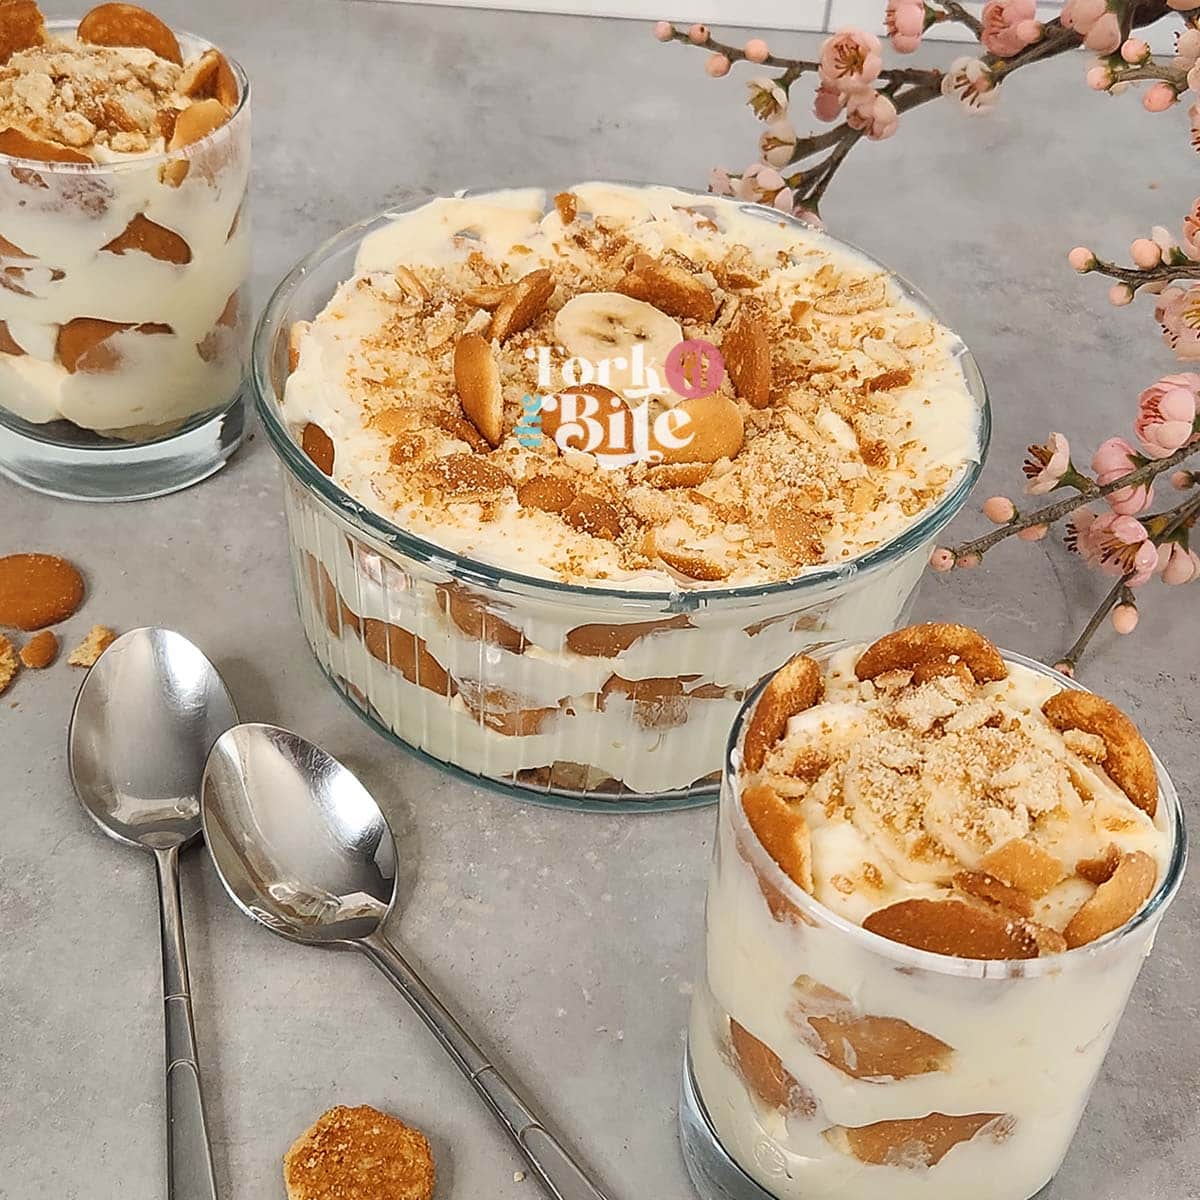 Indulge in a heavenly Pioneer Woman banana pudding recipe that combines creamy custard, ripe bananas, and crunchy vanilla wafers, all topped with a fluffy whipped cream layer.